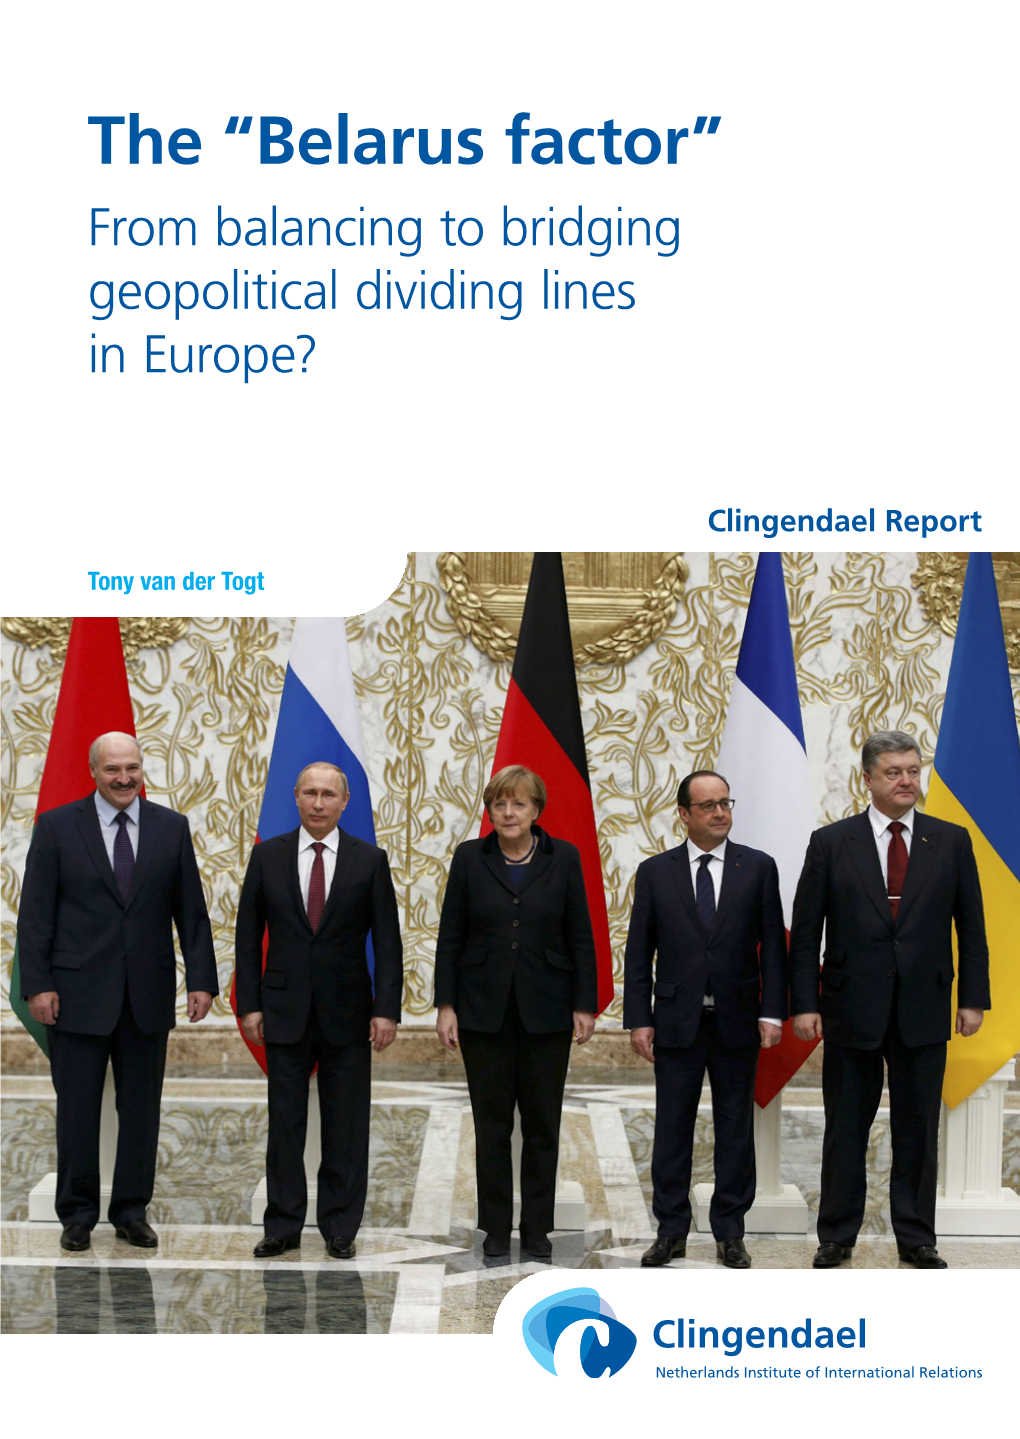 The “Belarus Factor” from Balancing to Bridging Geopolitical Dividing Lines in Europe?